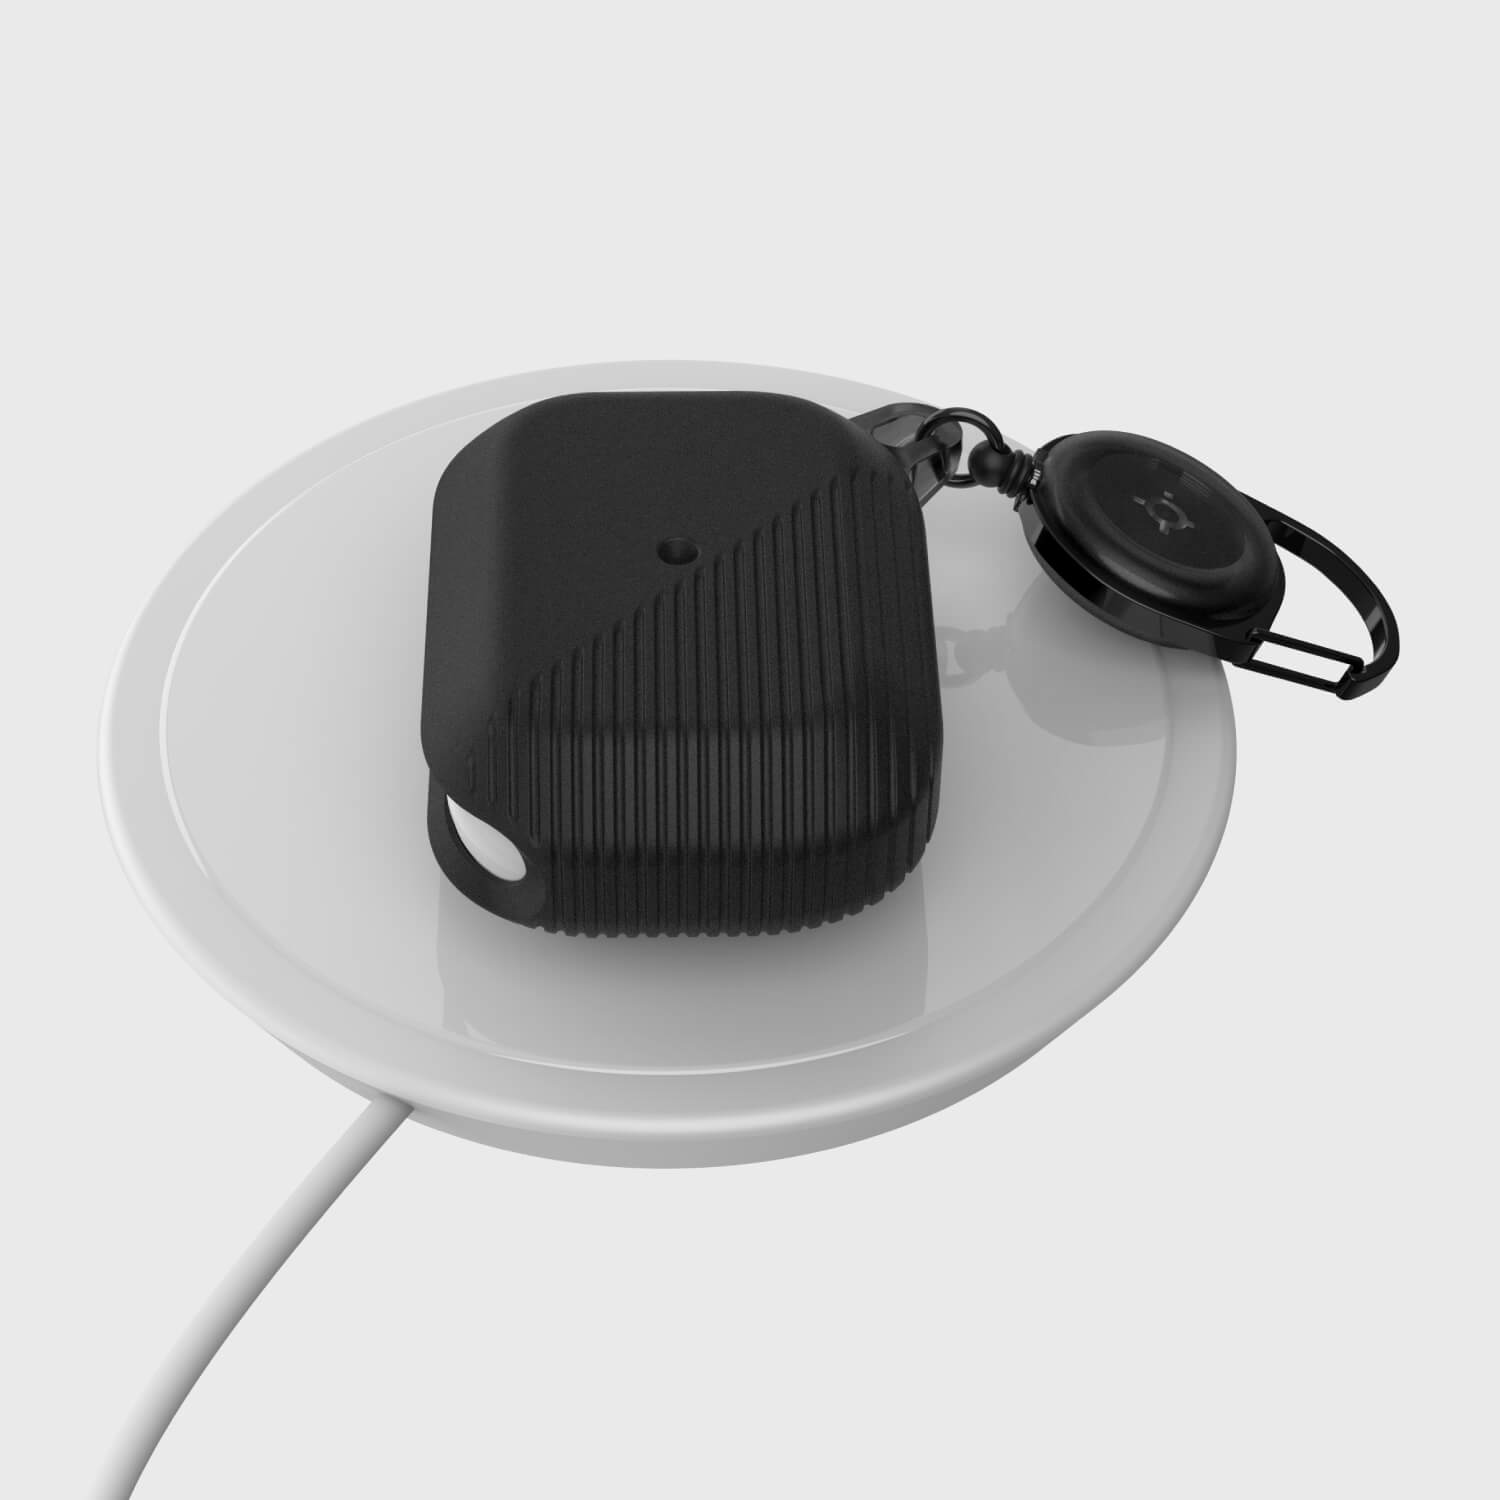 A Raptic Apple AirPods Pro Case - RADIUS, protected by a silicone case, is sitting on top of a white plate.